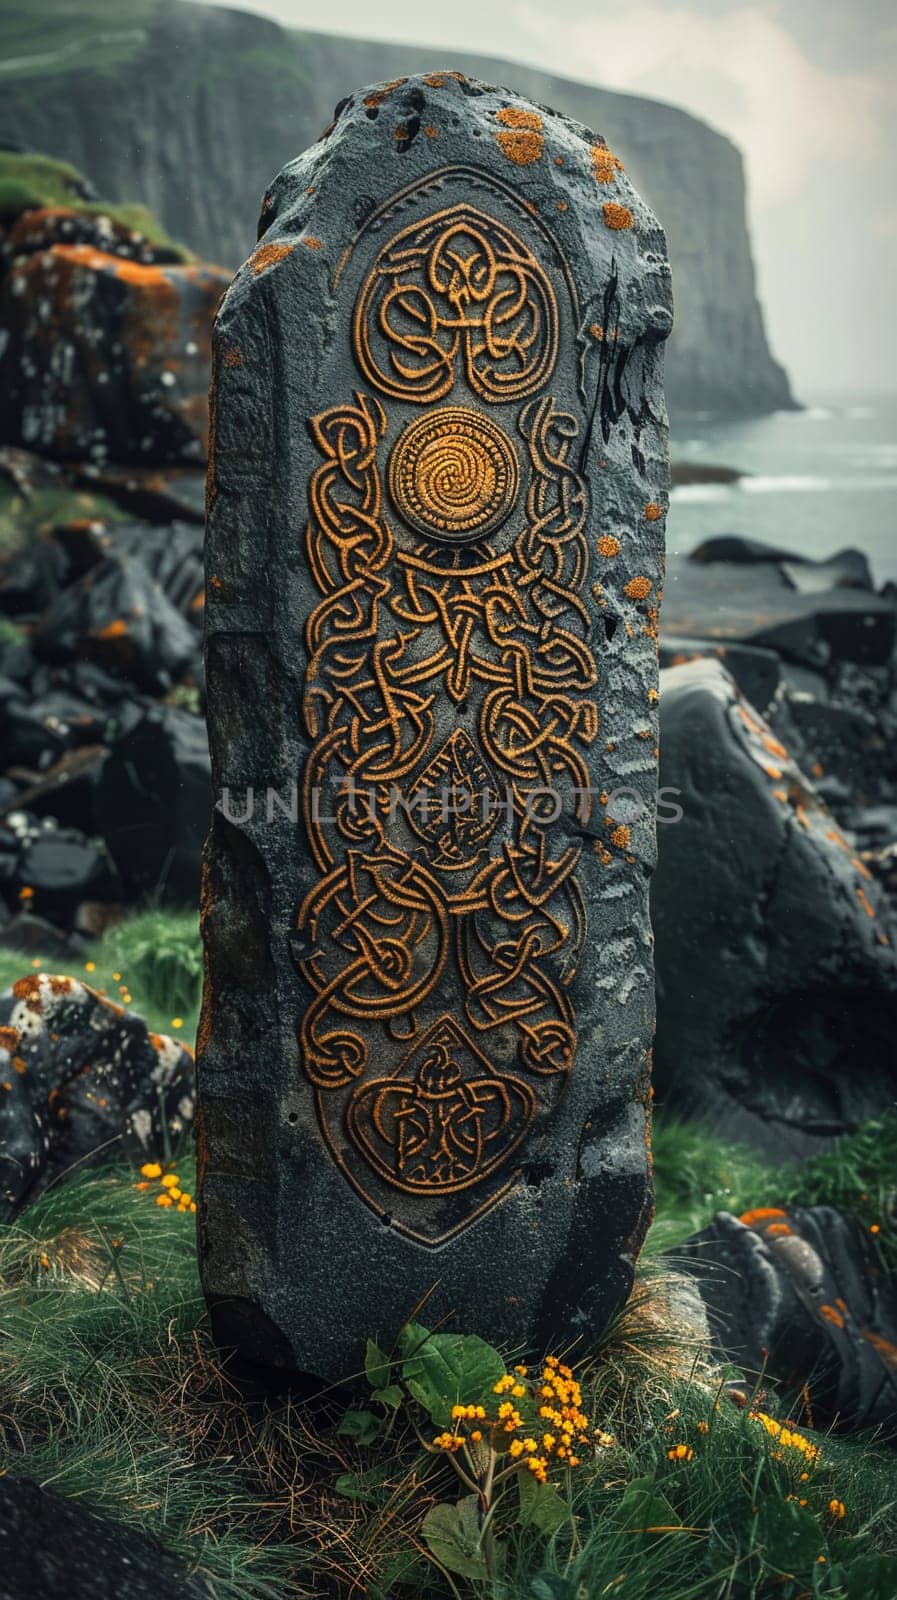 Viking Runestones Whispering Ancient Nordic Lore, The runes blur into rock, carrying the weight of myths and ancestral wisdom.